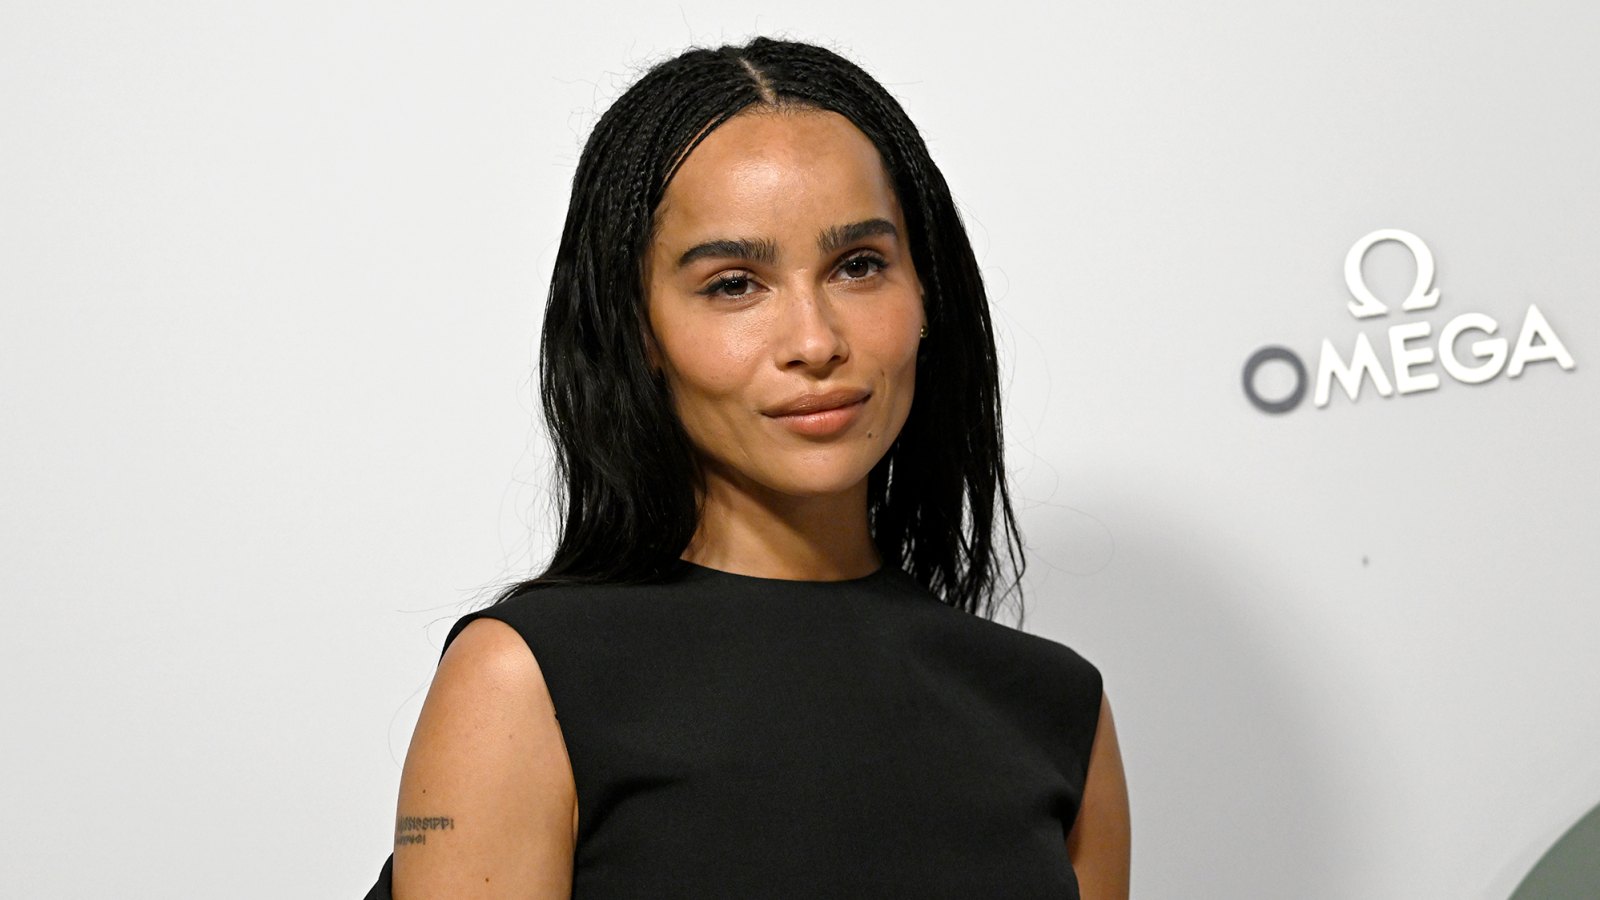 Zoë Kravitz at the Omega Aqua Terra Shades, International Launch Event in London on March 22, 2023.